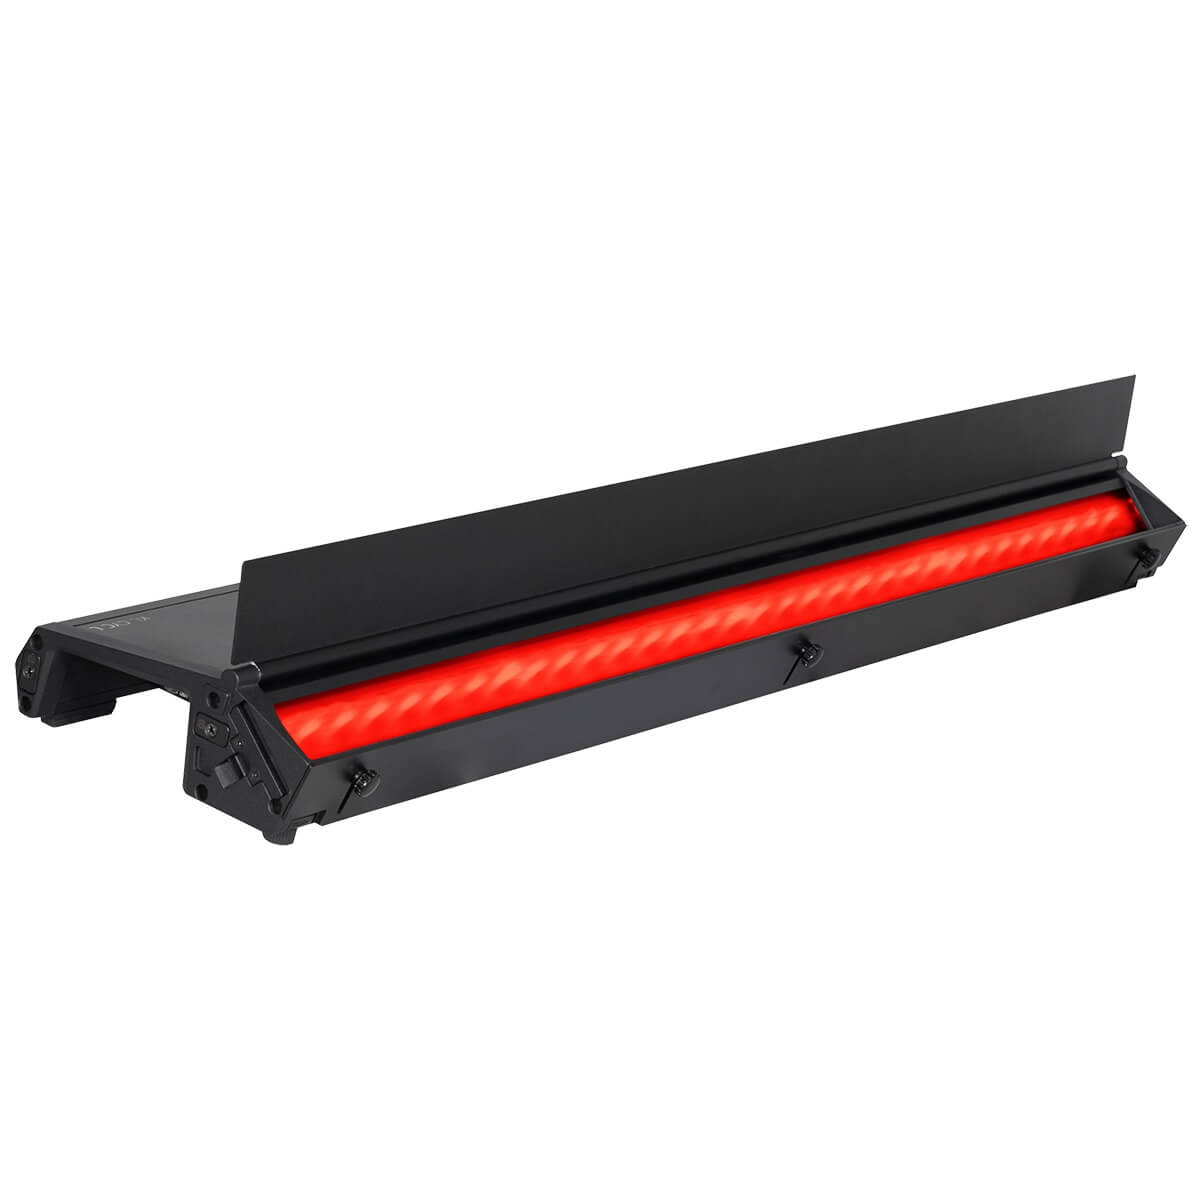 Elation KL CYC L - RGBMA LED Cyc Light and Footlight Fixture, lit red